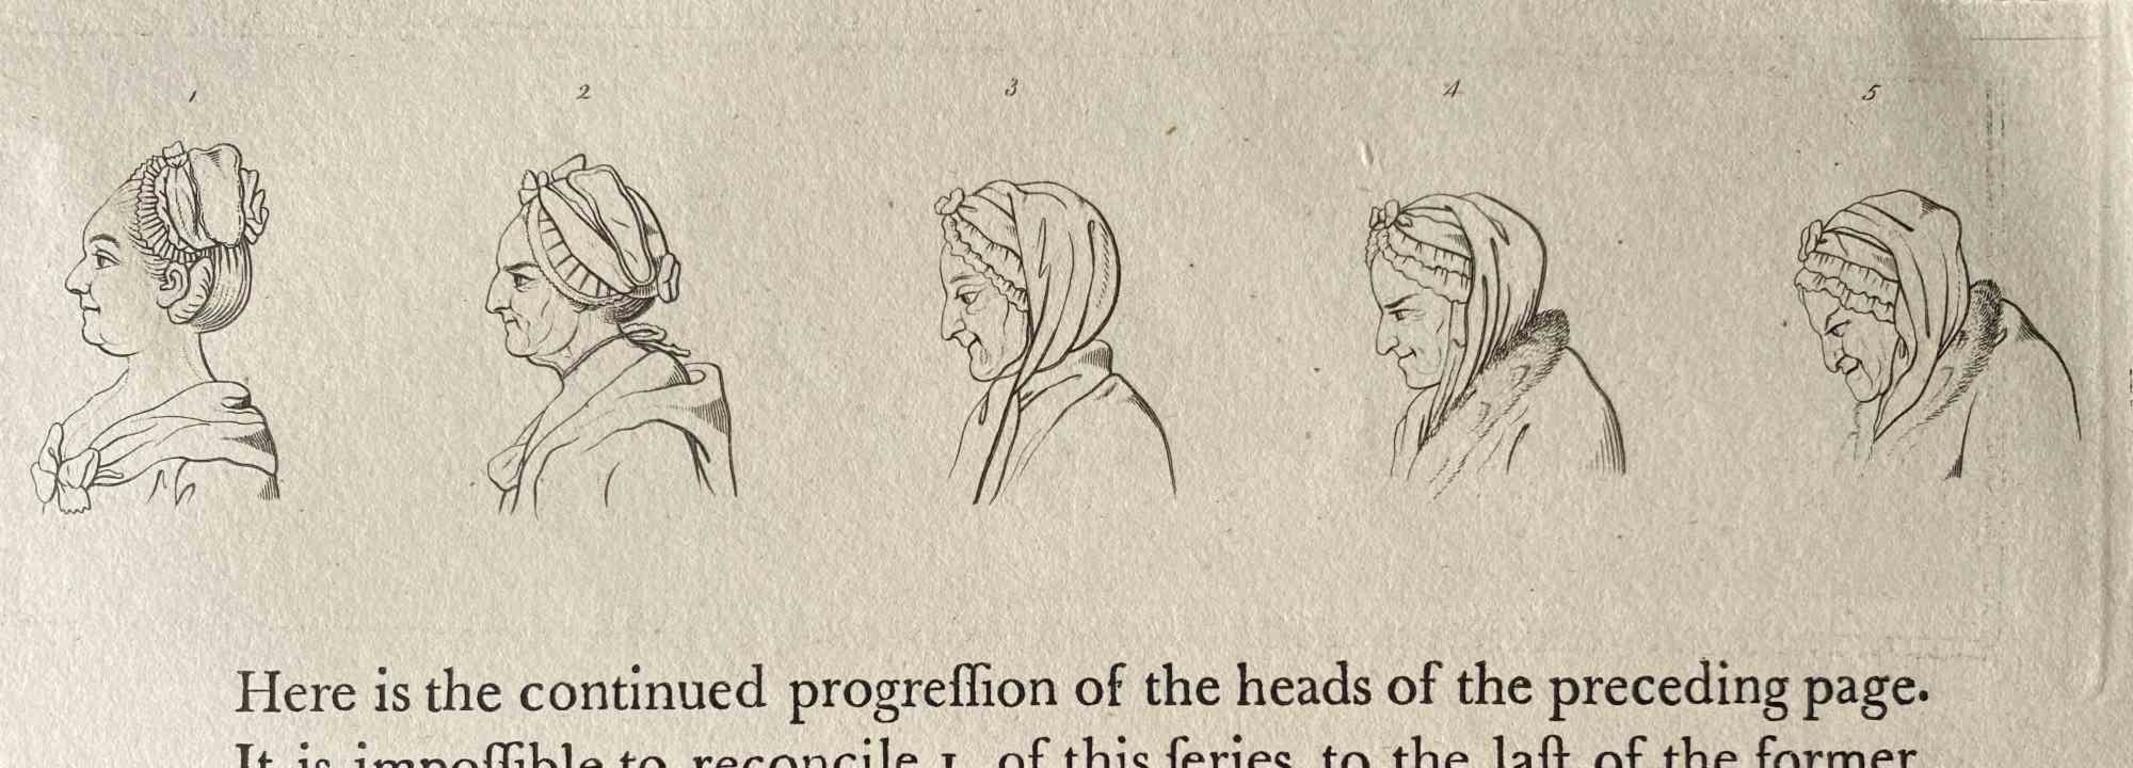 Heads of Women - Original Etching by Thomas Holloway - 1810 For Sale 1